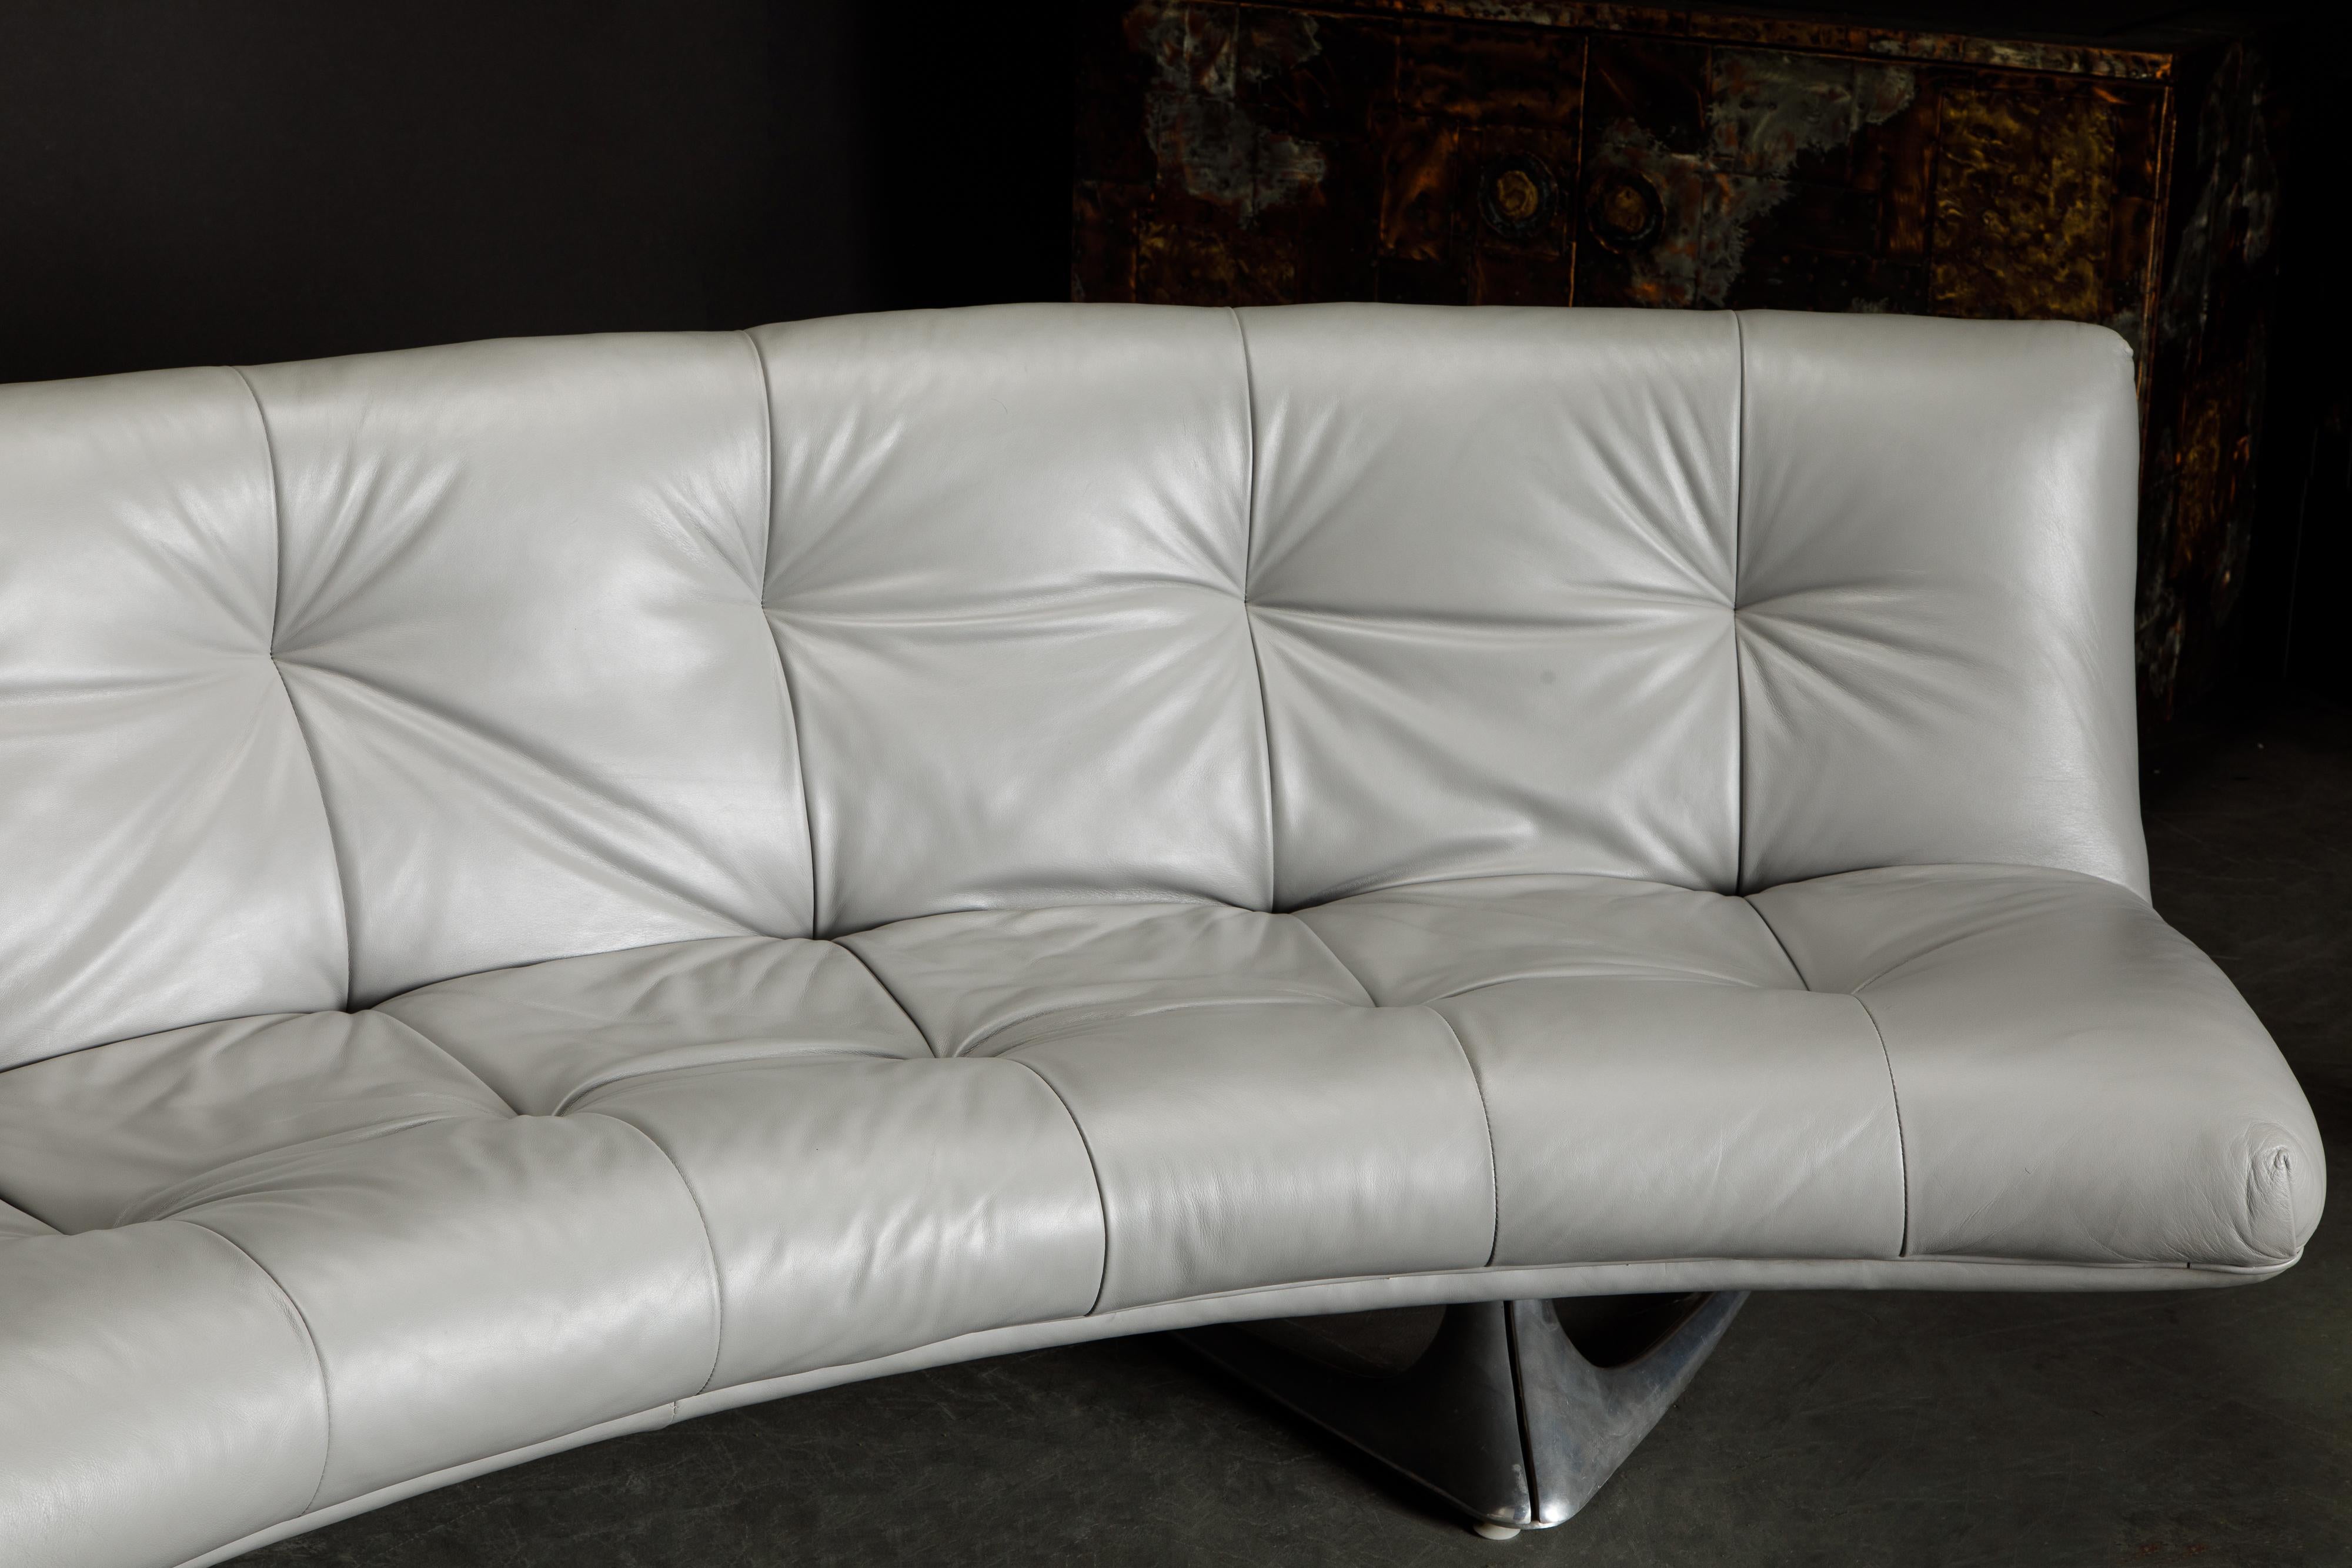 Rare 'Unicorn' Leather and Aluminum Curved Sofa by Vladimir Kagan, c. 1963 For Sale 3